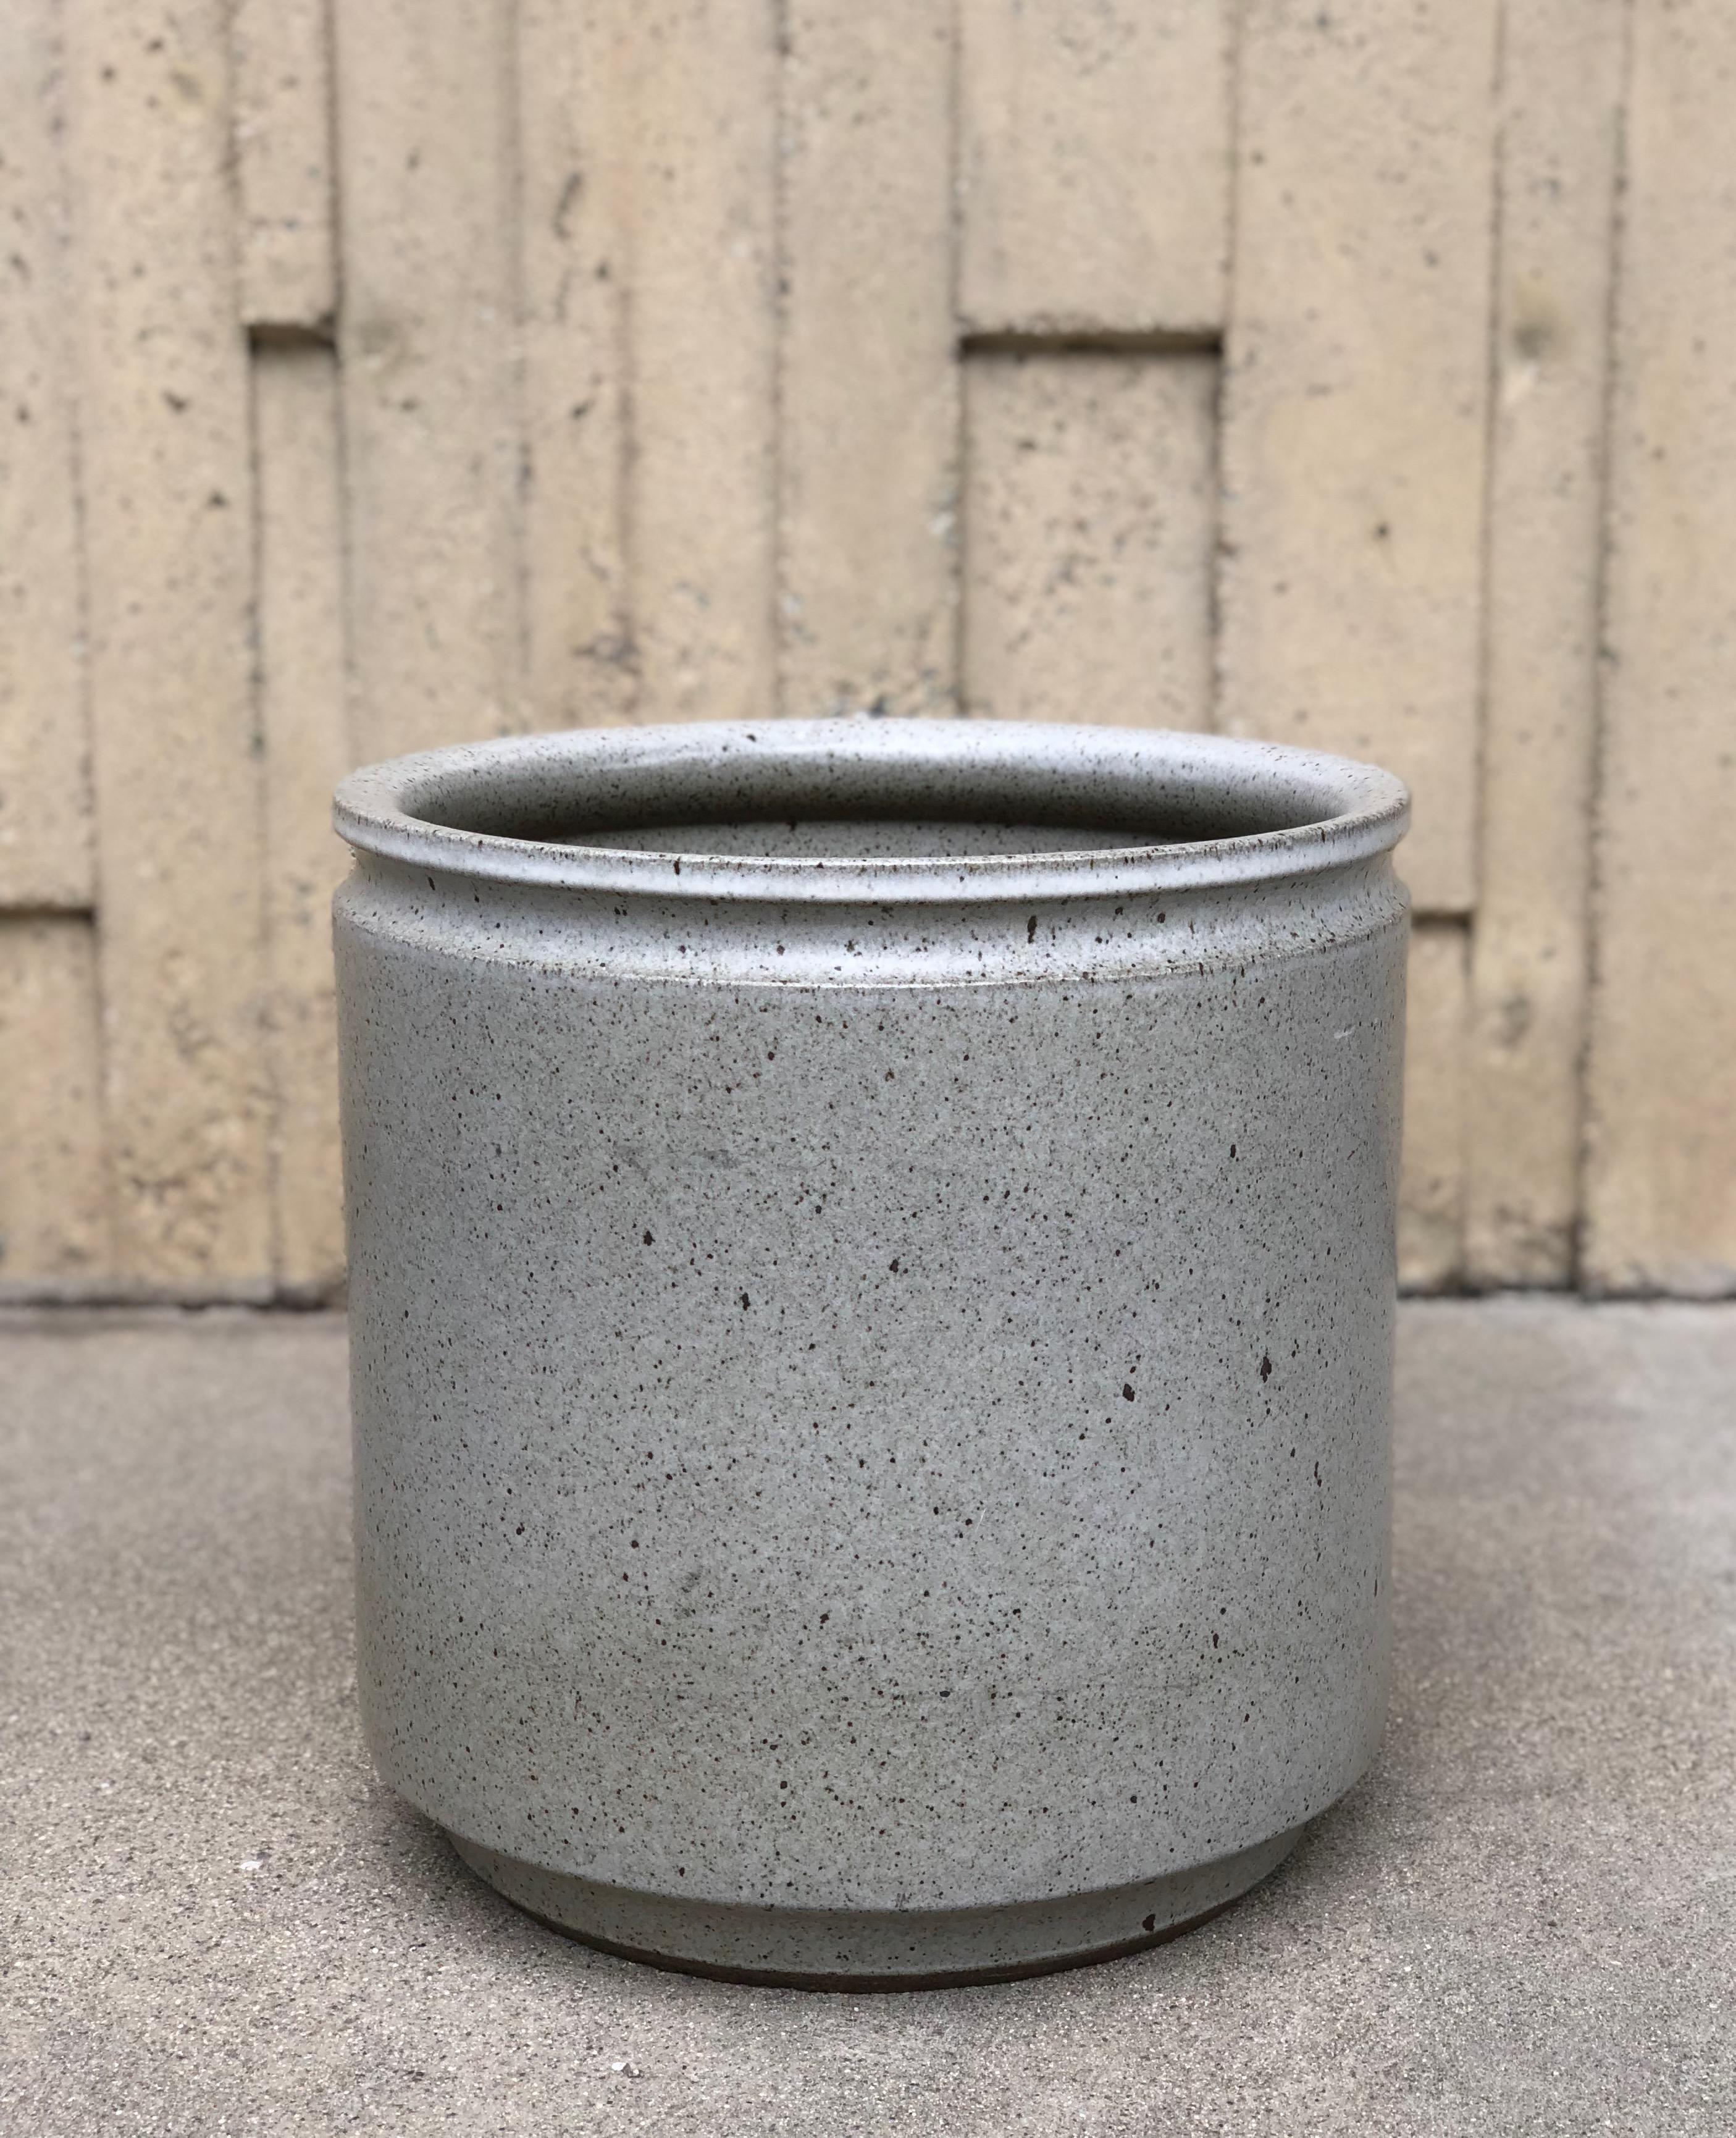 American David Cressey Architectural Pottery Planter For Sale